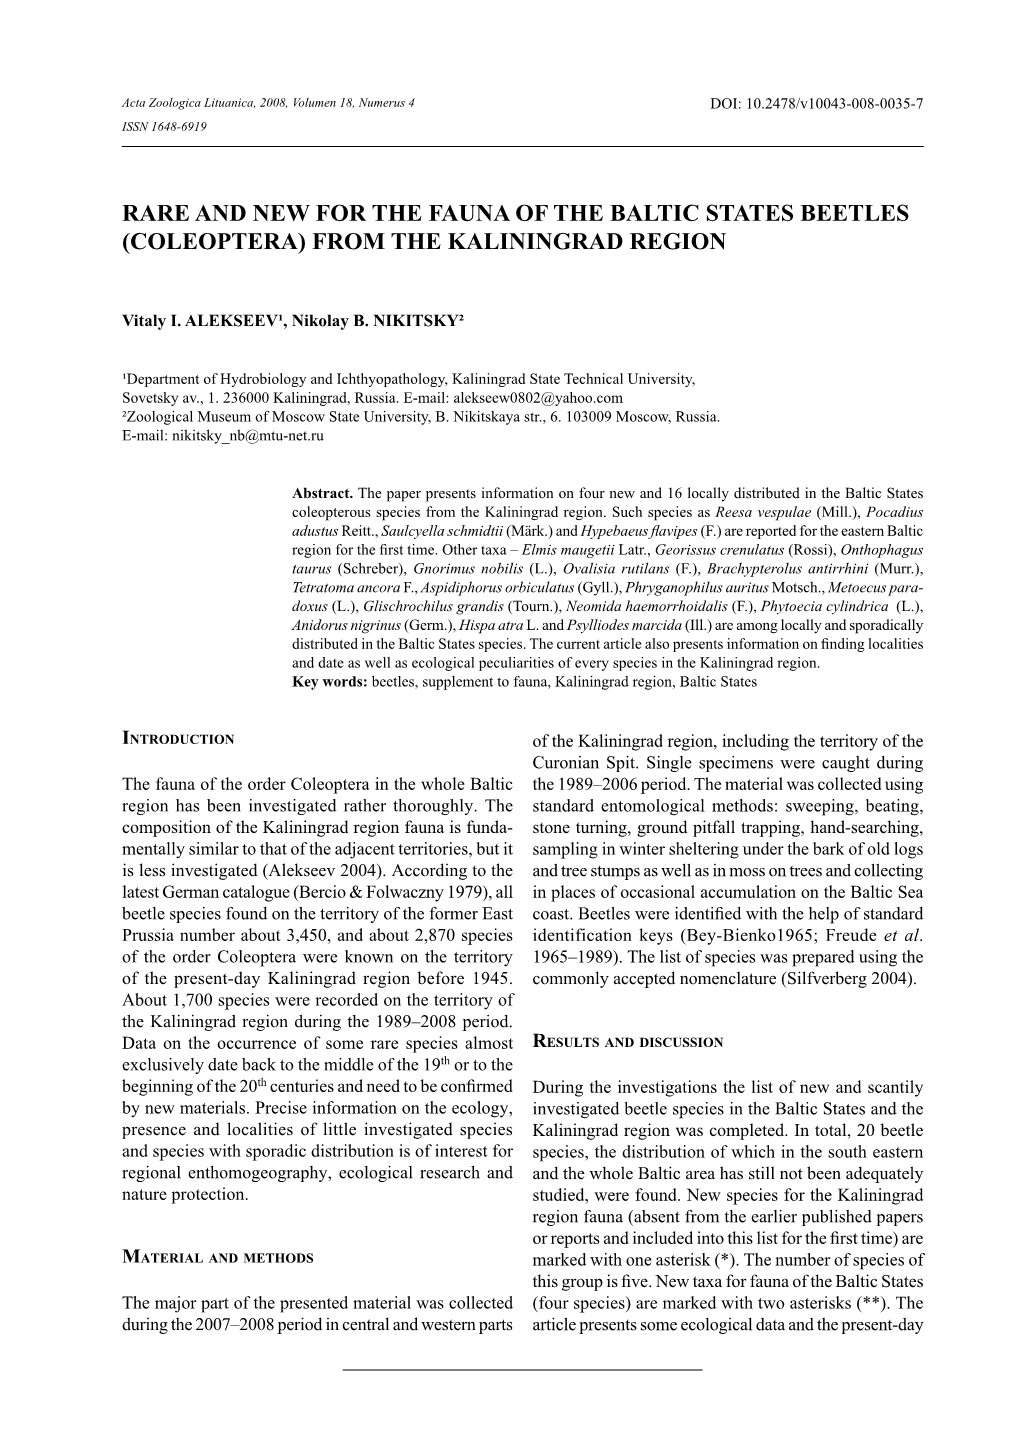 Rare and New for the Fauna of the Baltic States Beetles (Coleoptera) from the Kaliningrad Region